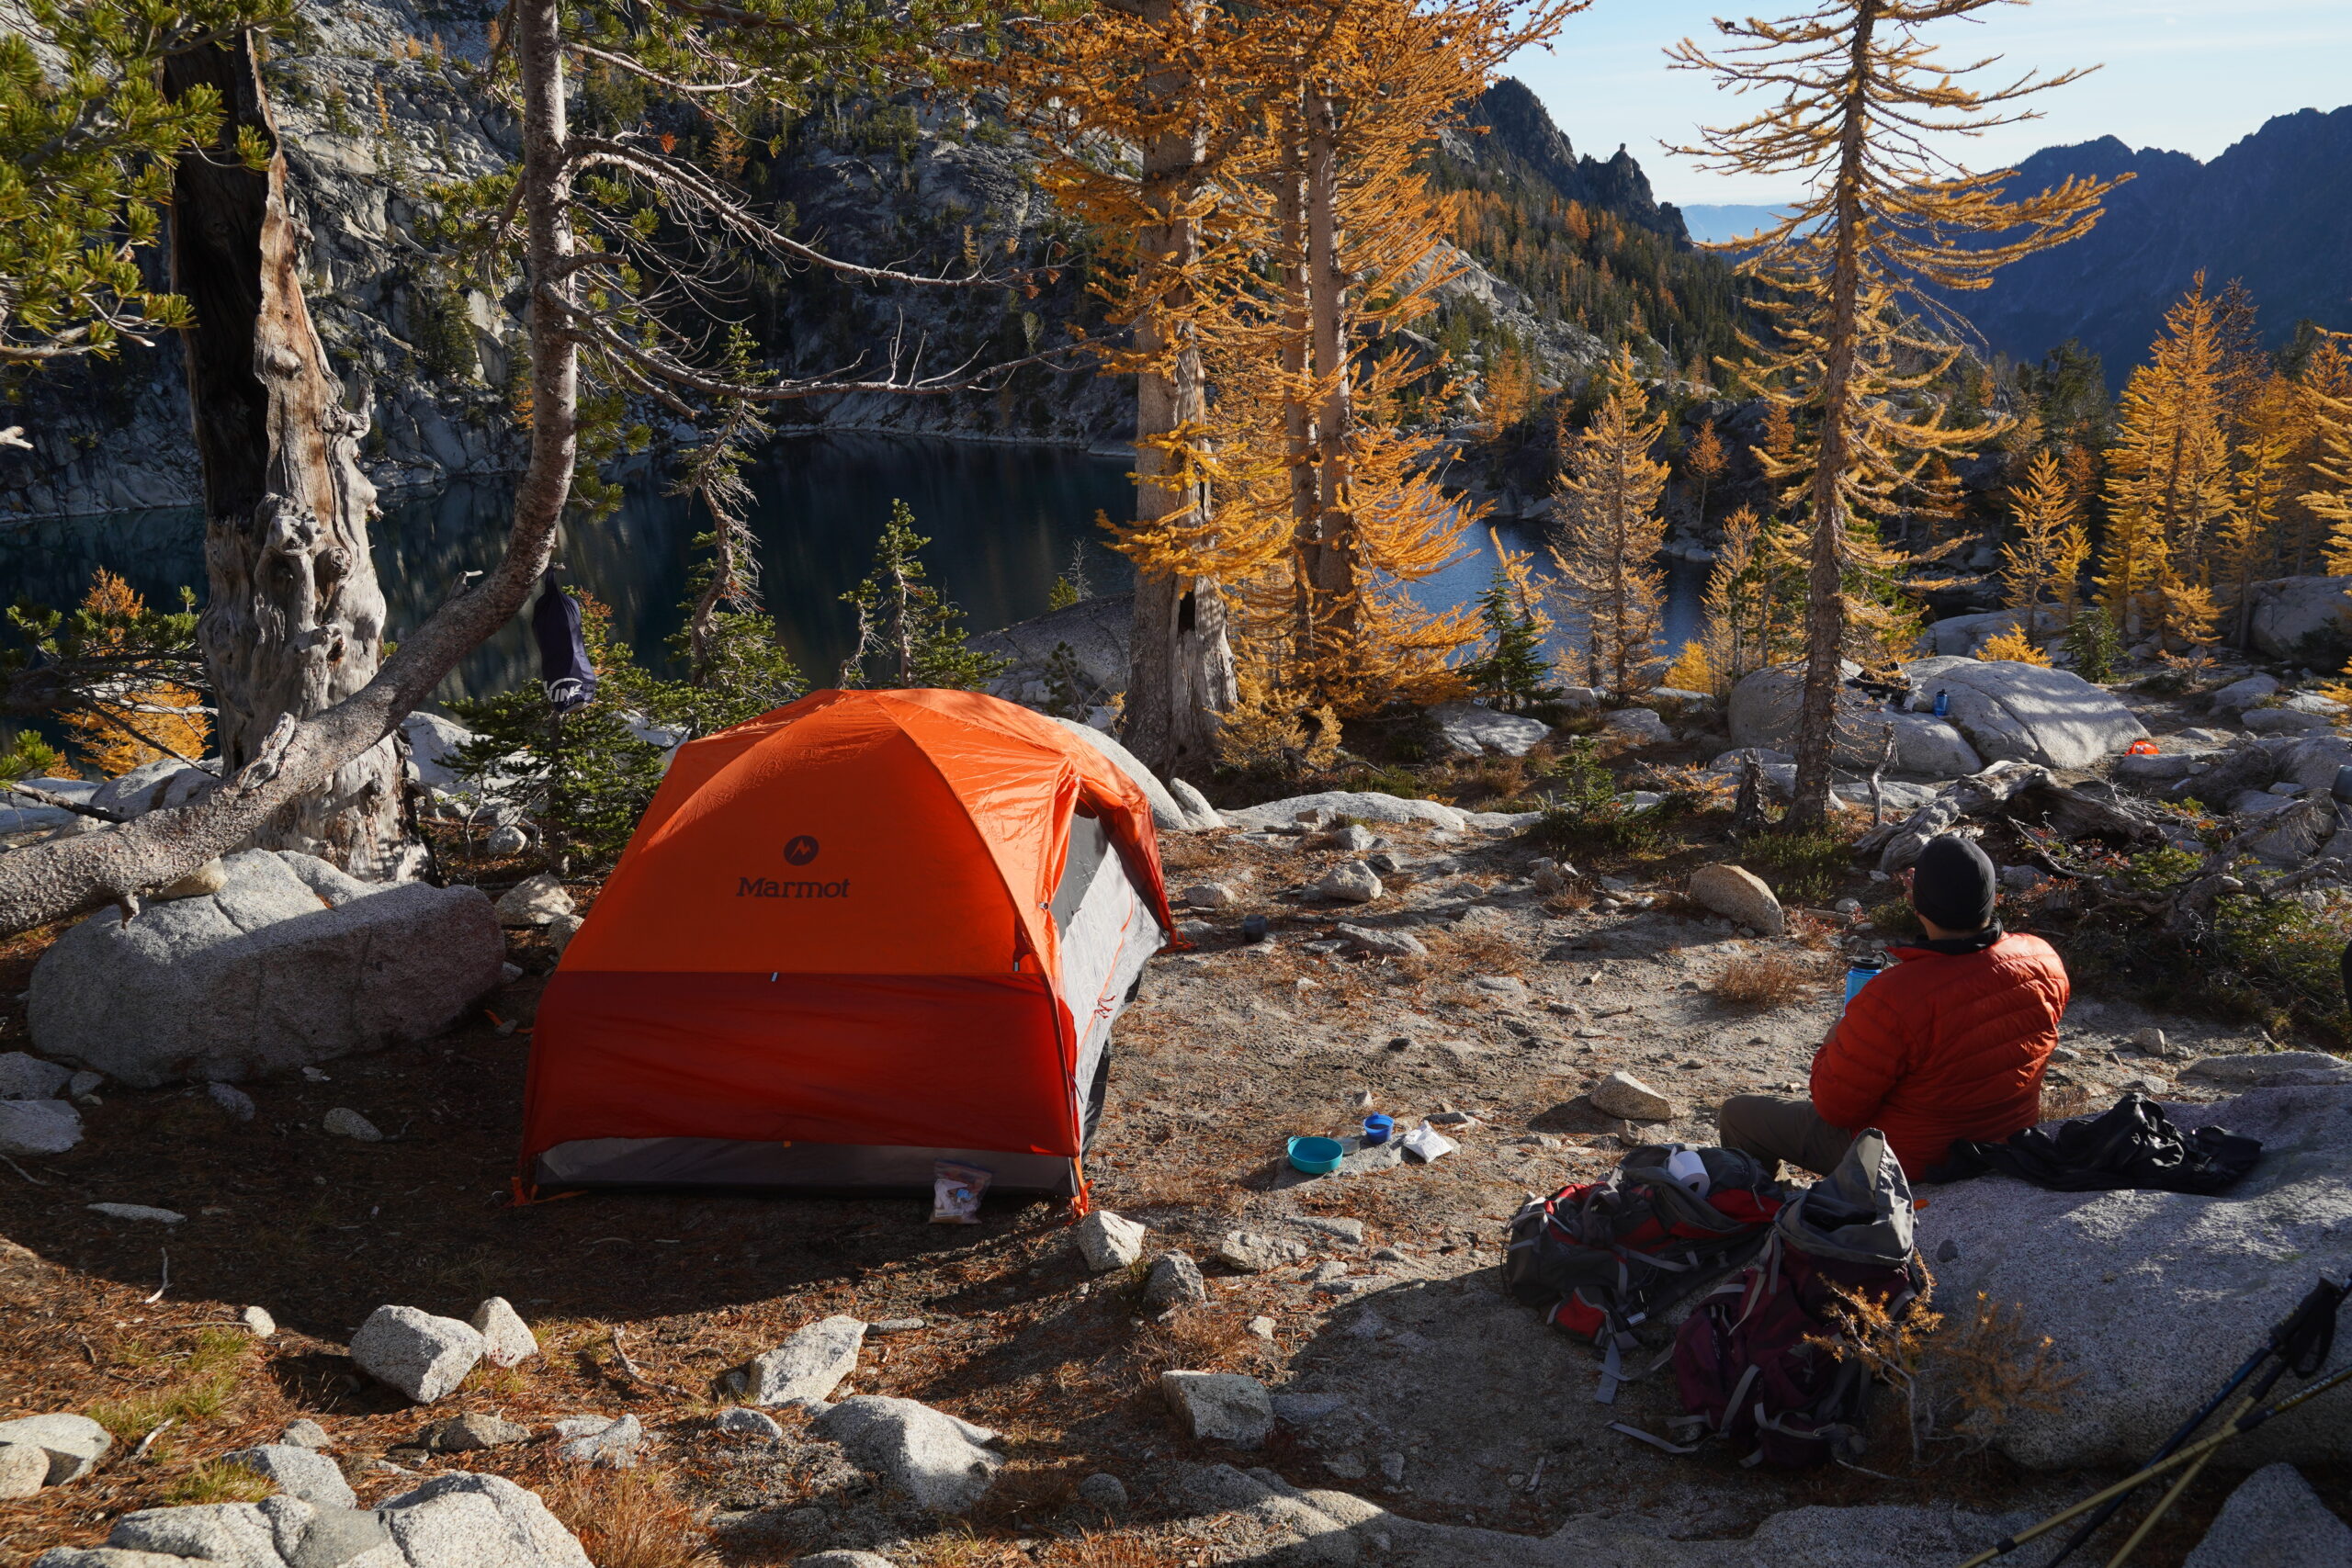 Backpacking Recipes